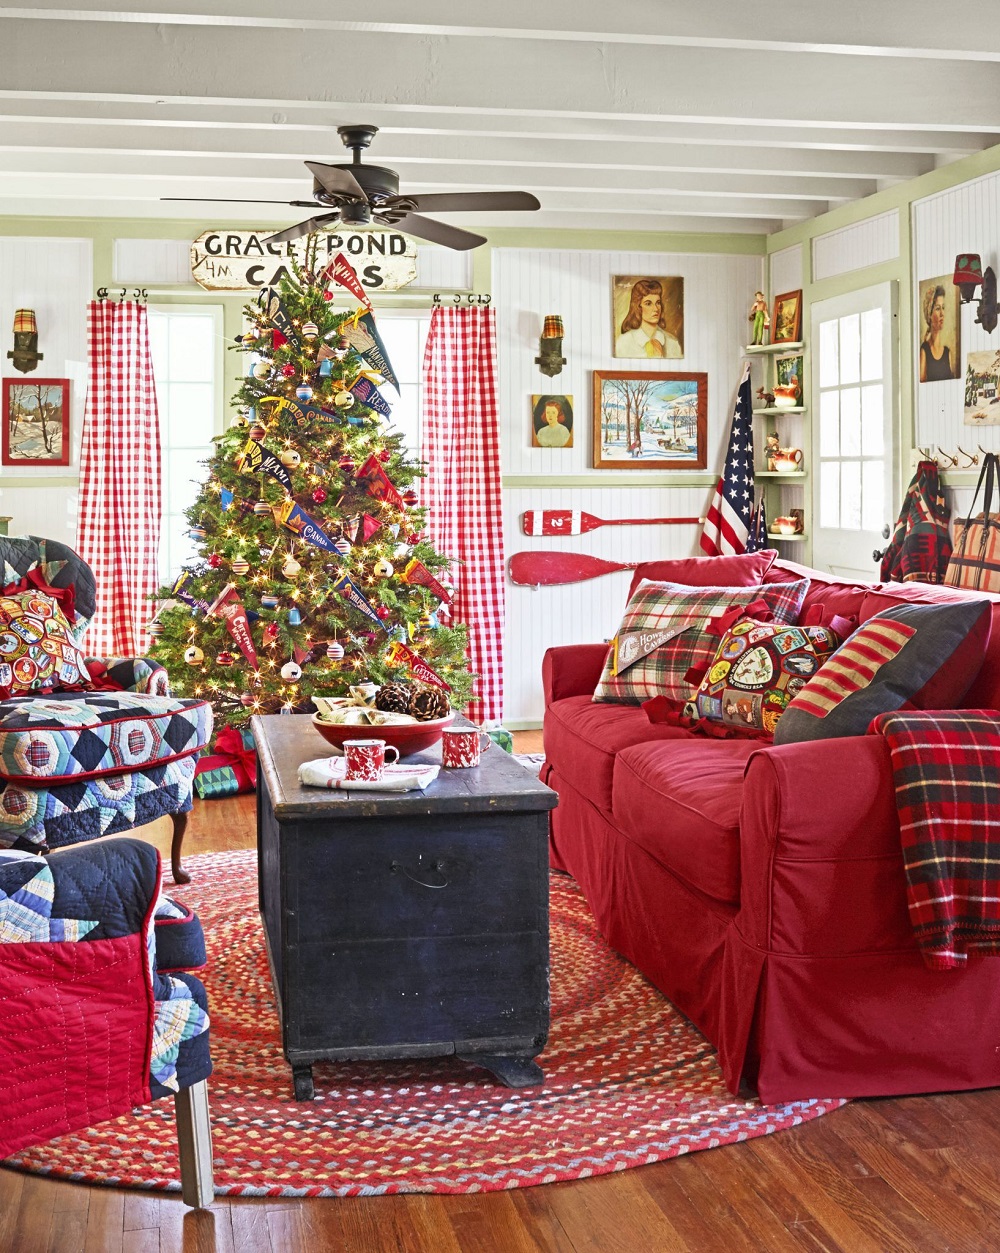 t3-135 Christmas living room decorations you must try in the holiday season